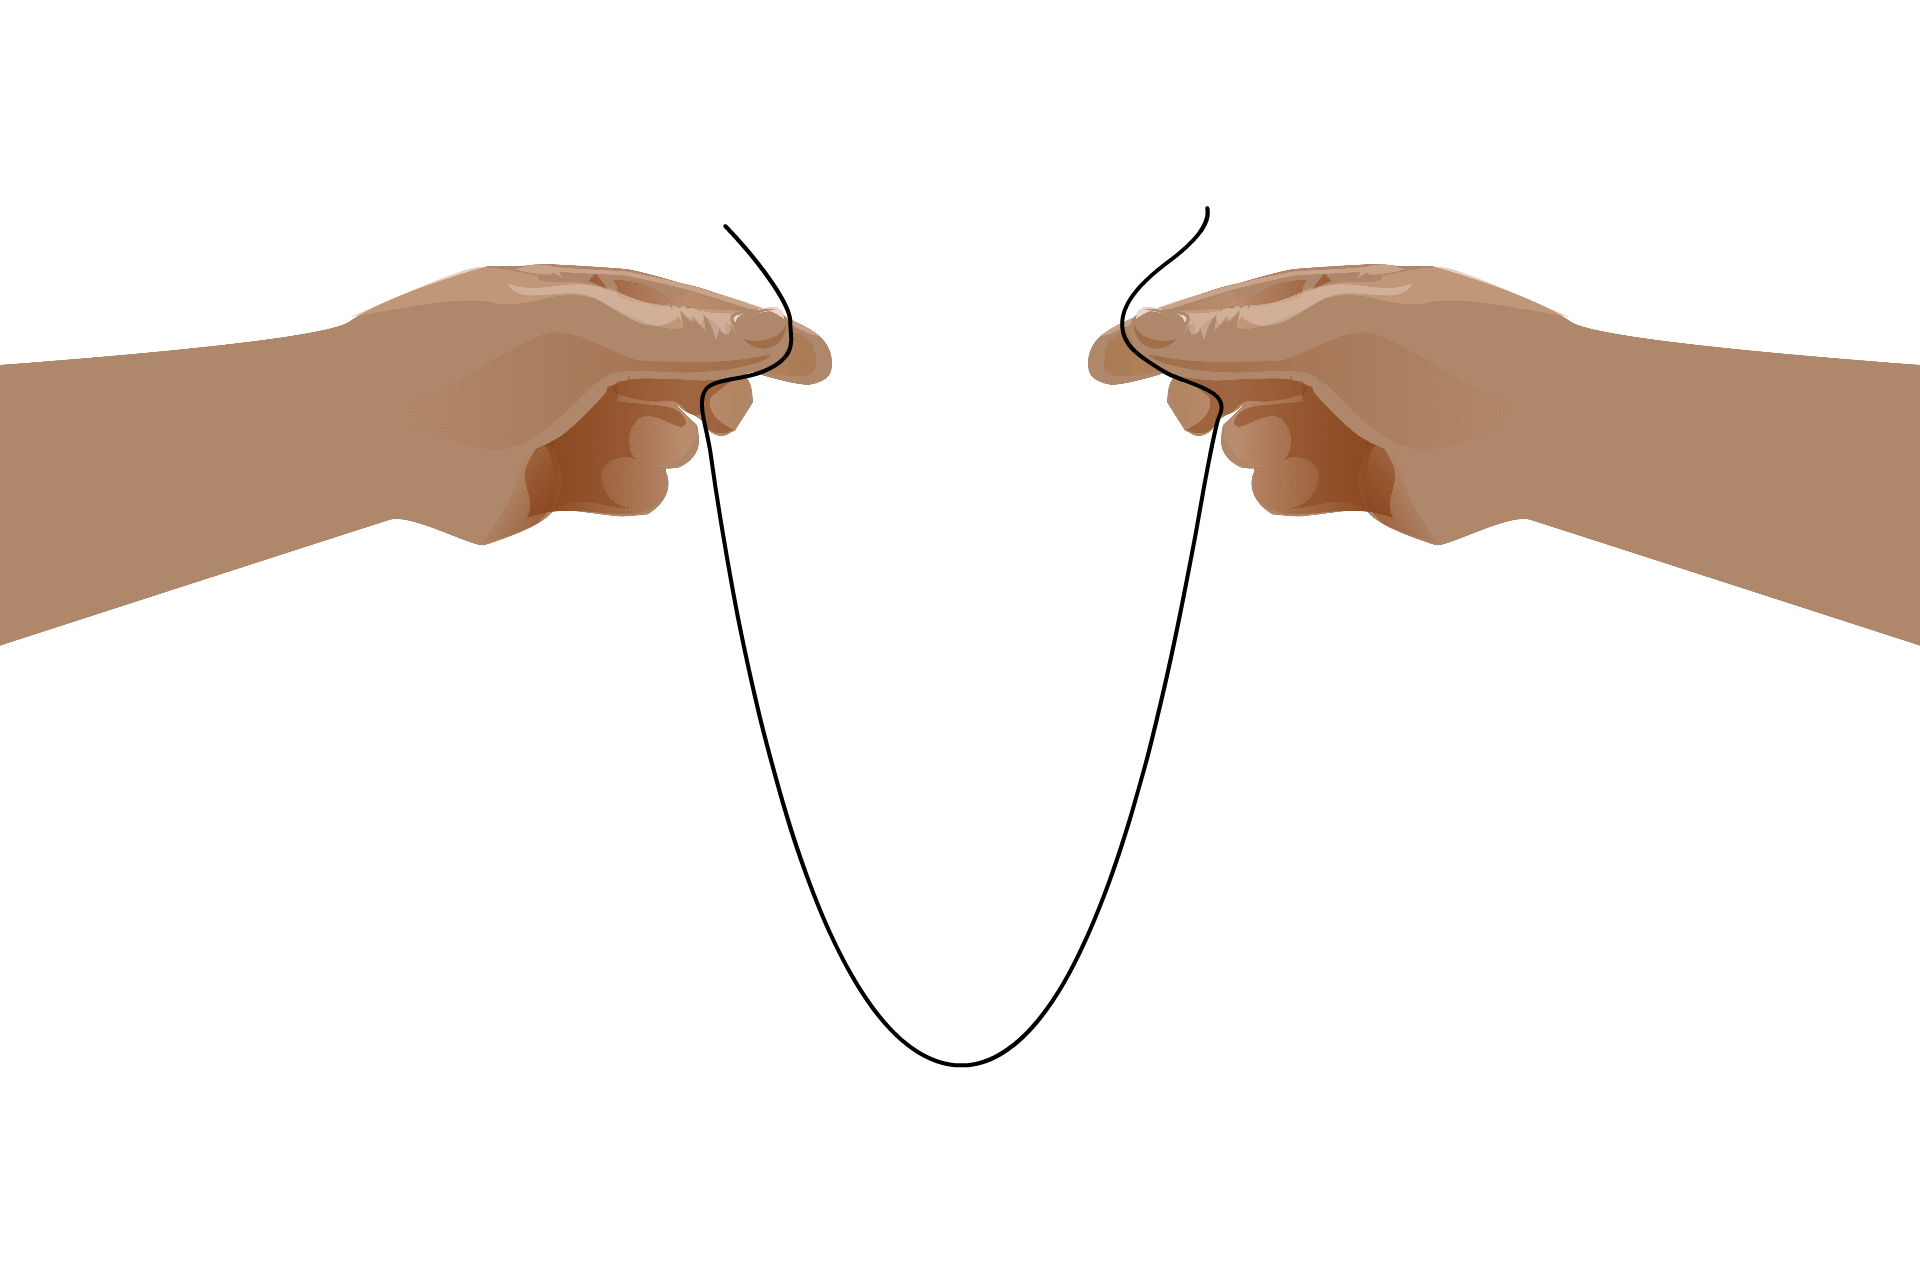 Gif of hands holding a string that curls back on itself